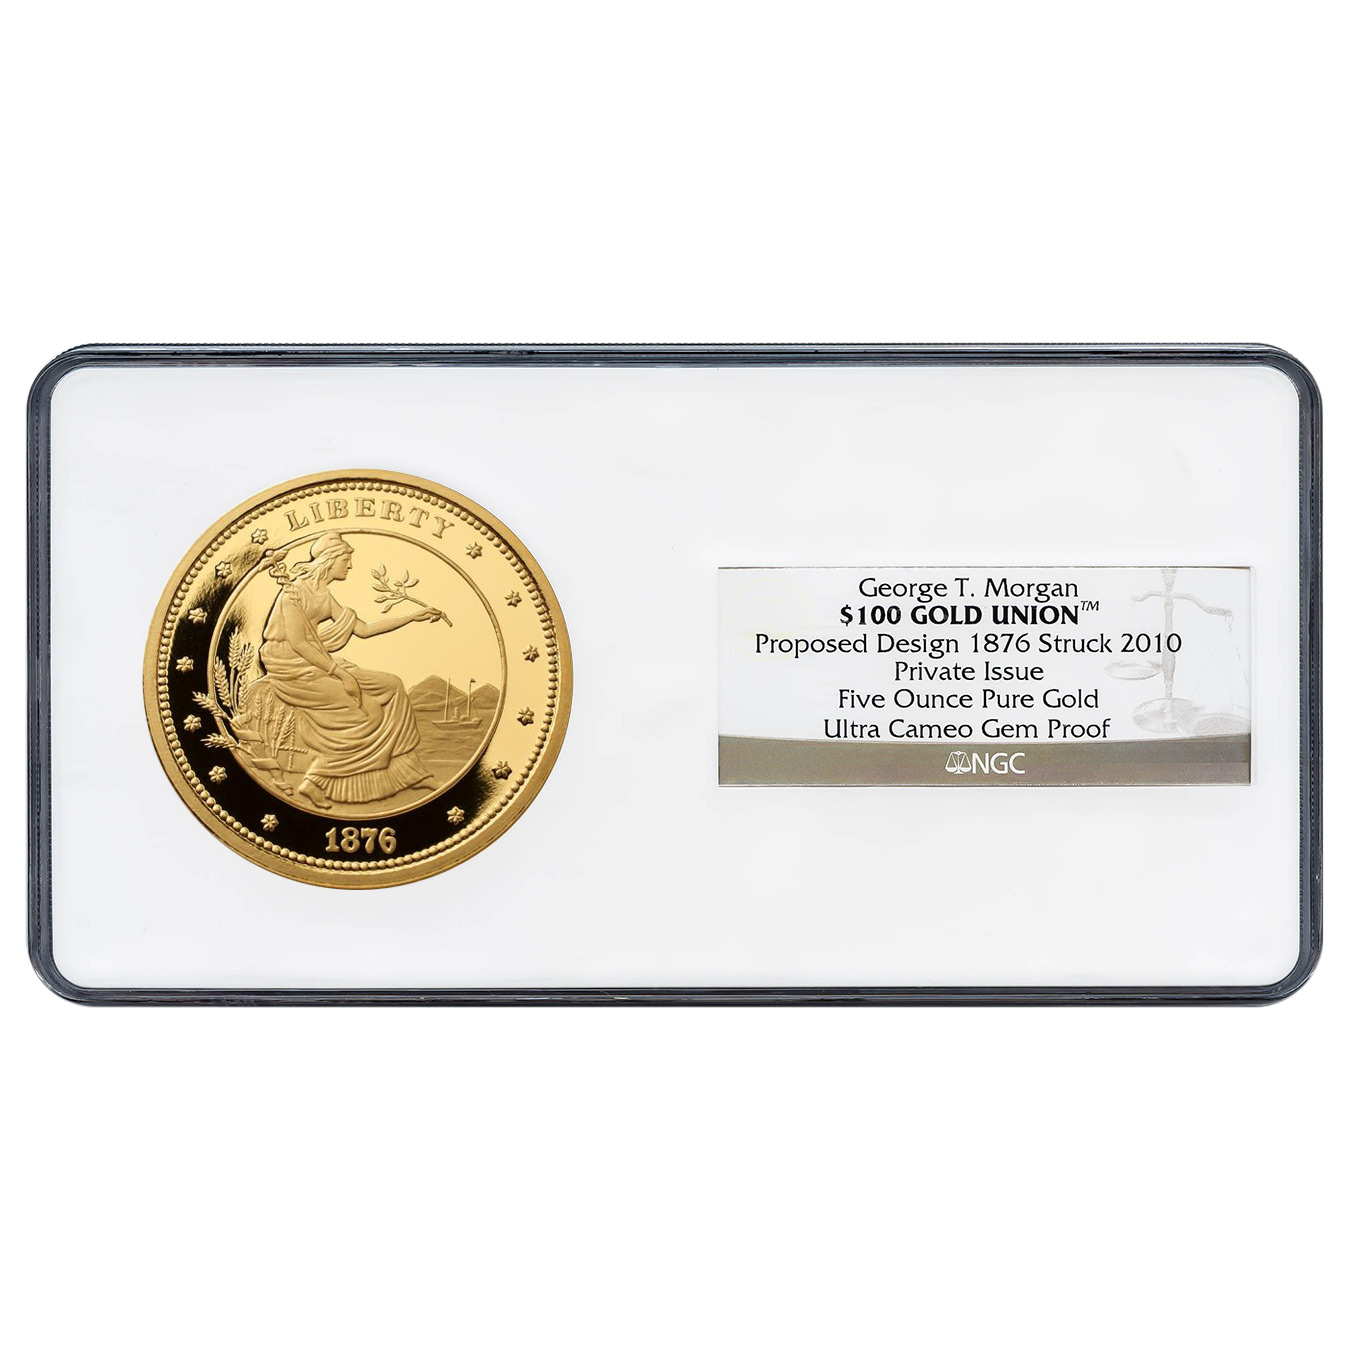 Certified $100 Gold Union Five Ounce Proposed 1876 Design Struck 2010 NGC Gem Proof